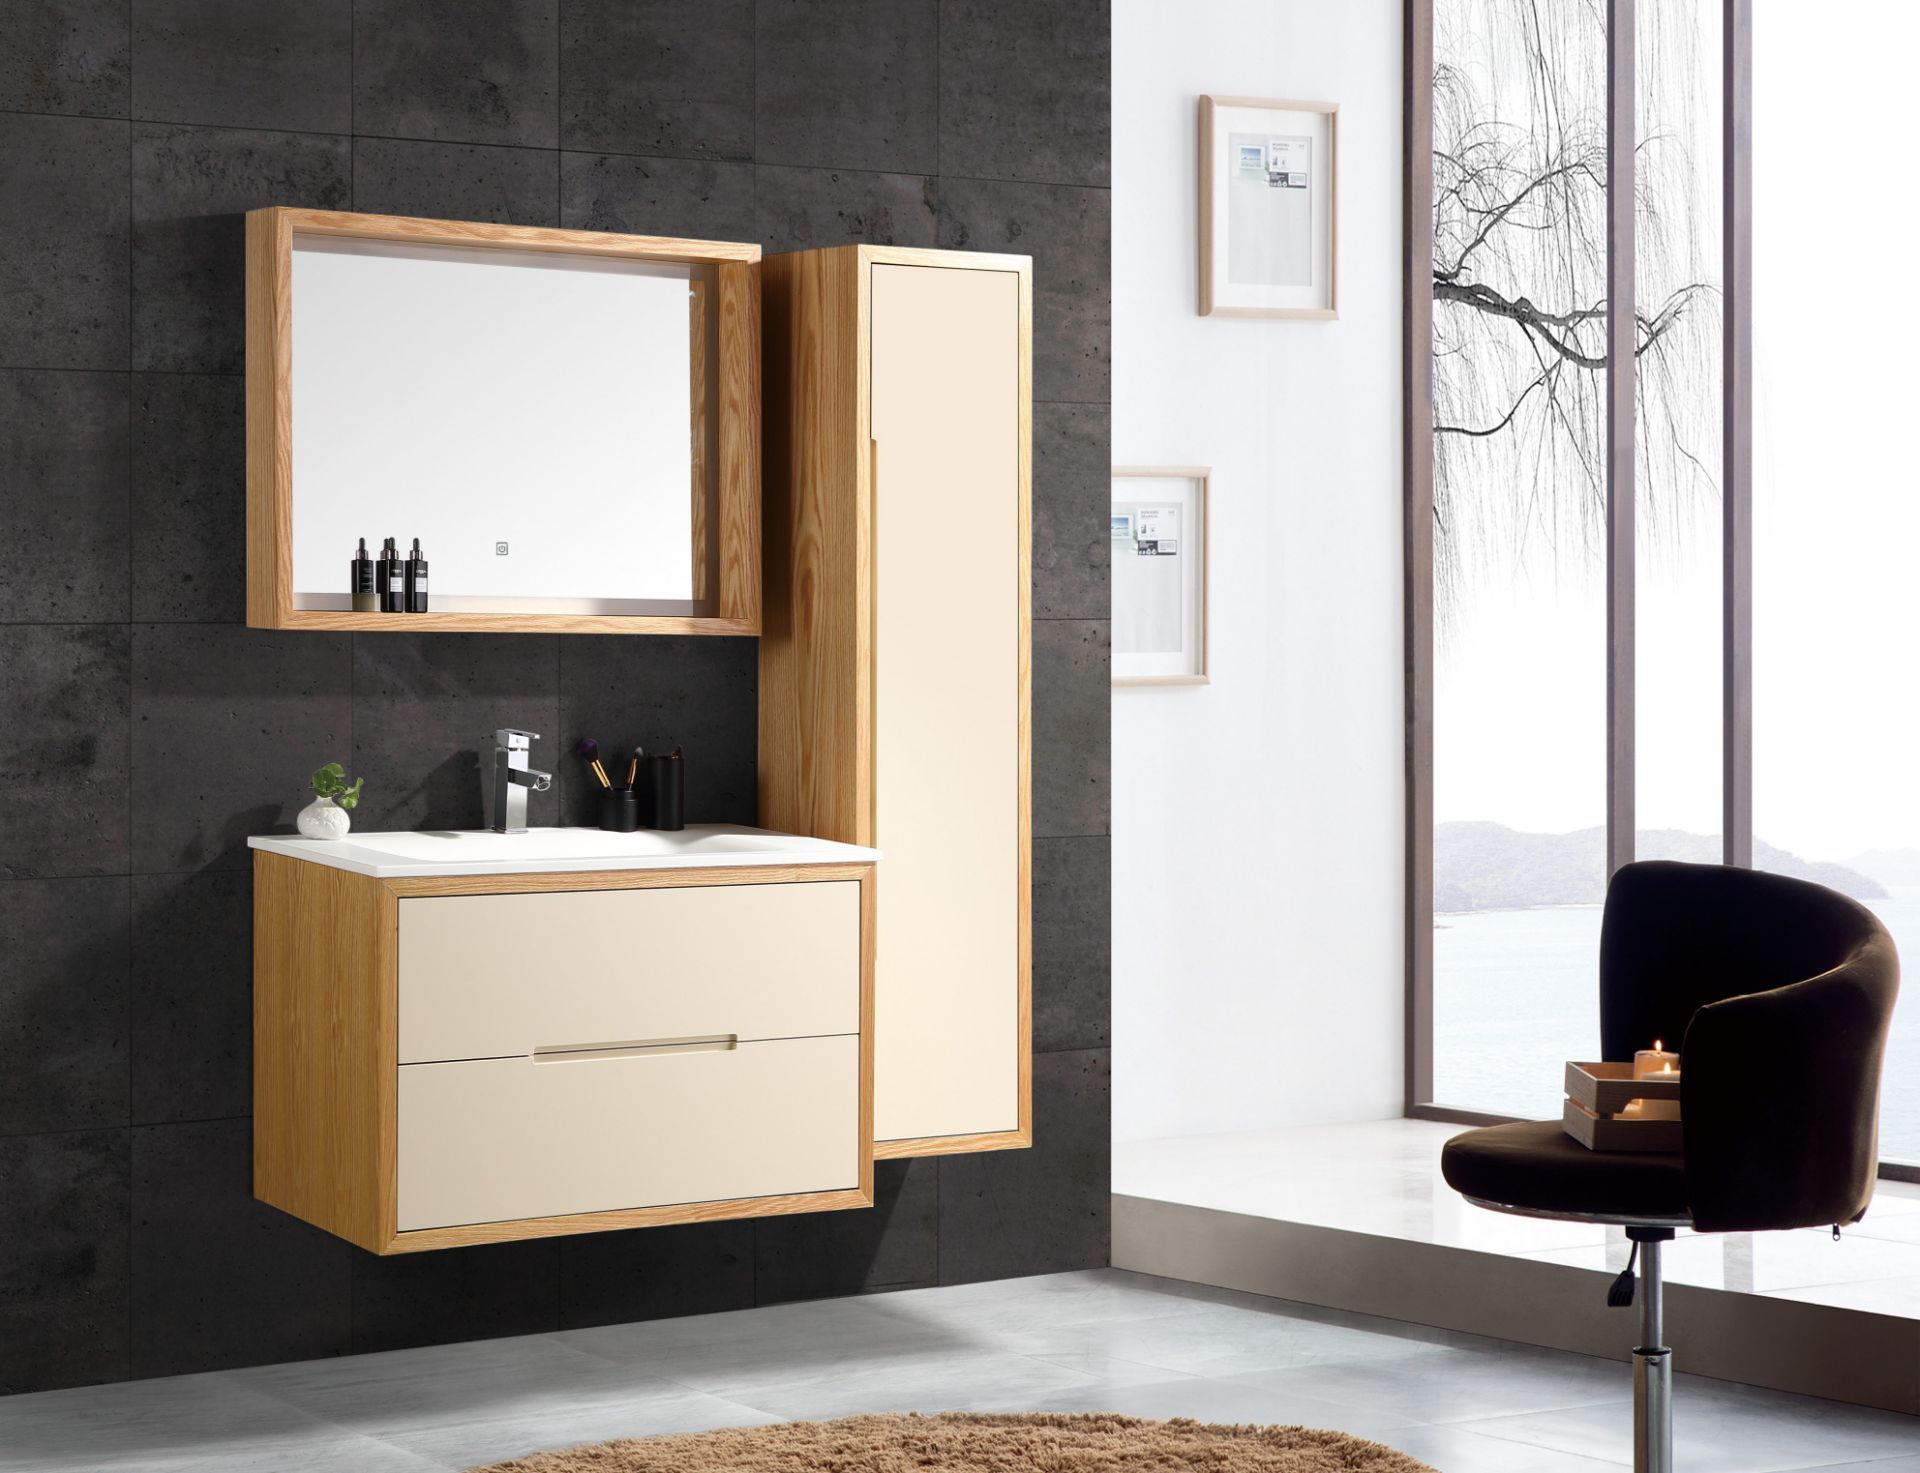 BRAND NEW Complete Vanity Unit Set in Beige with fixtures and fittings RRP £999.99 *NO VAT* - Image 2 of 5